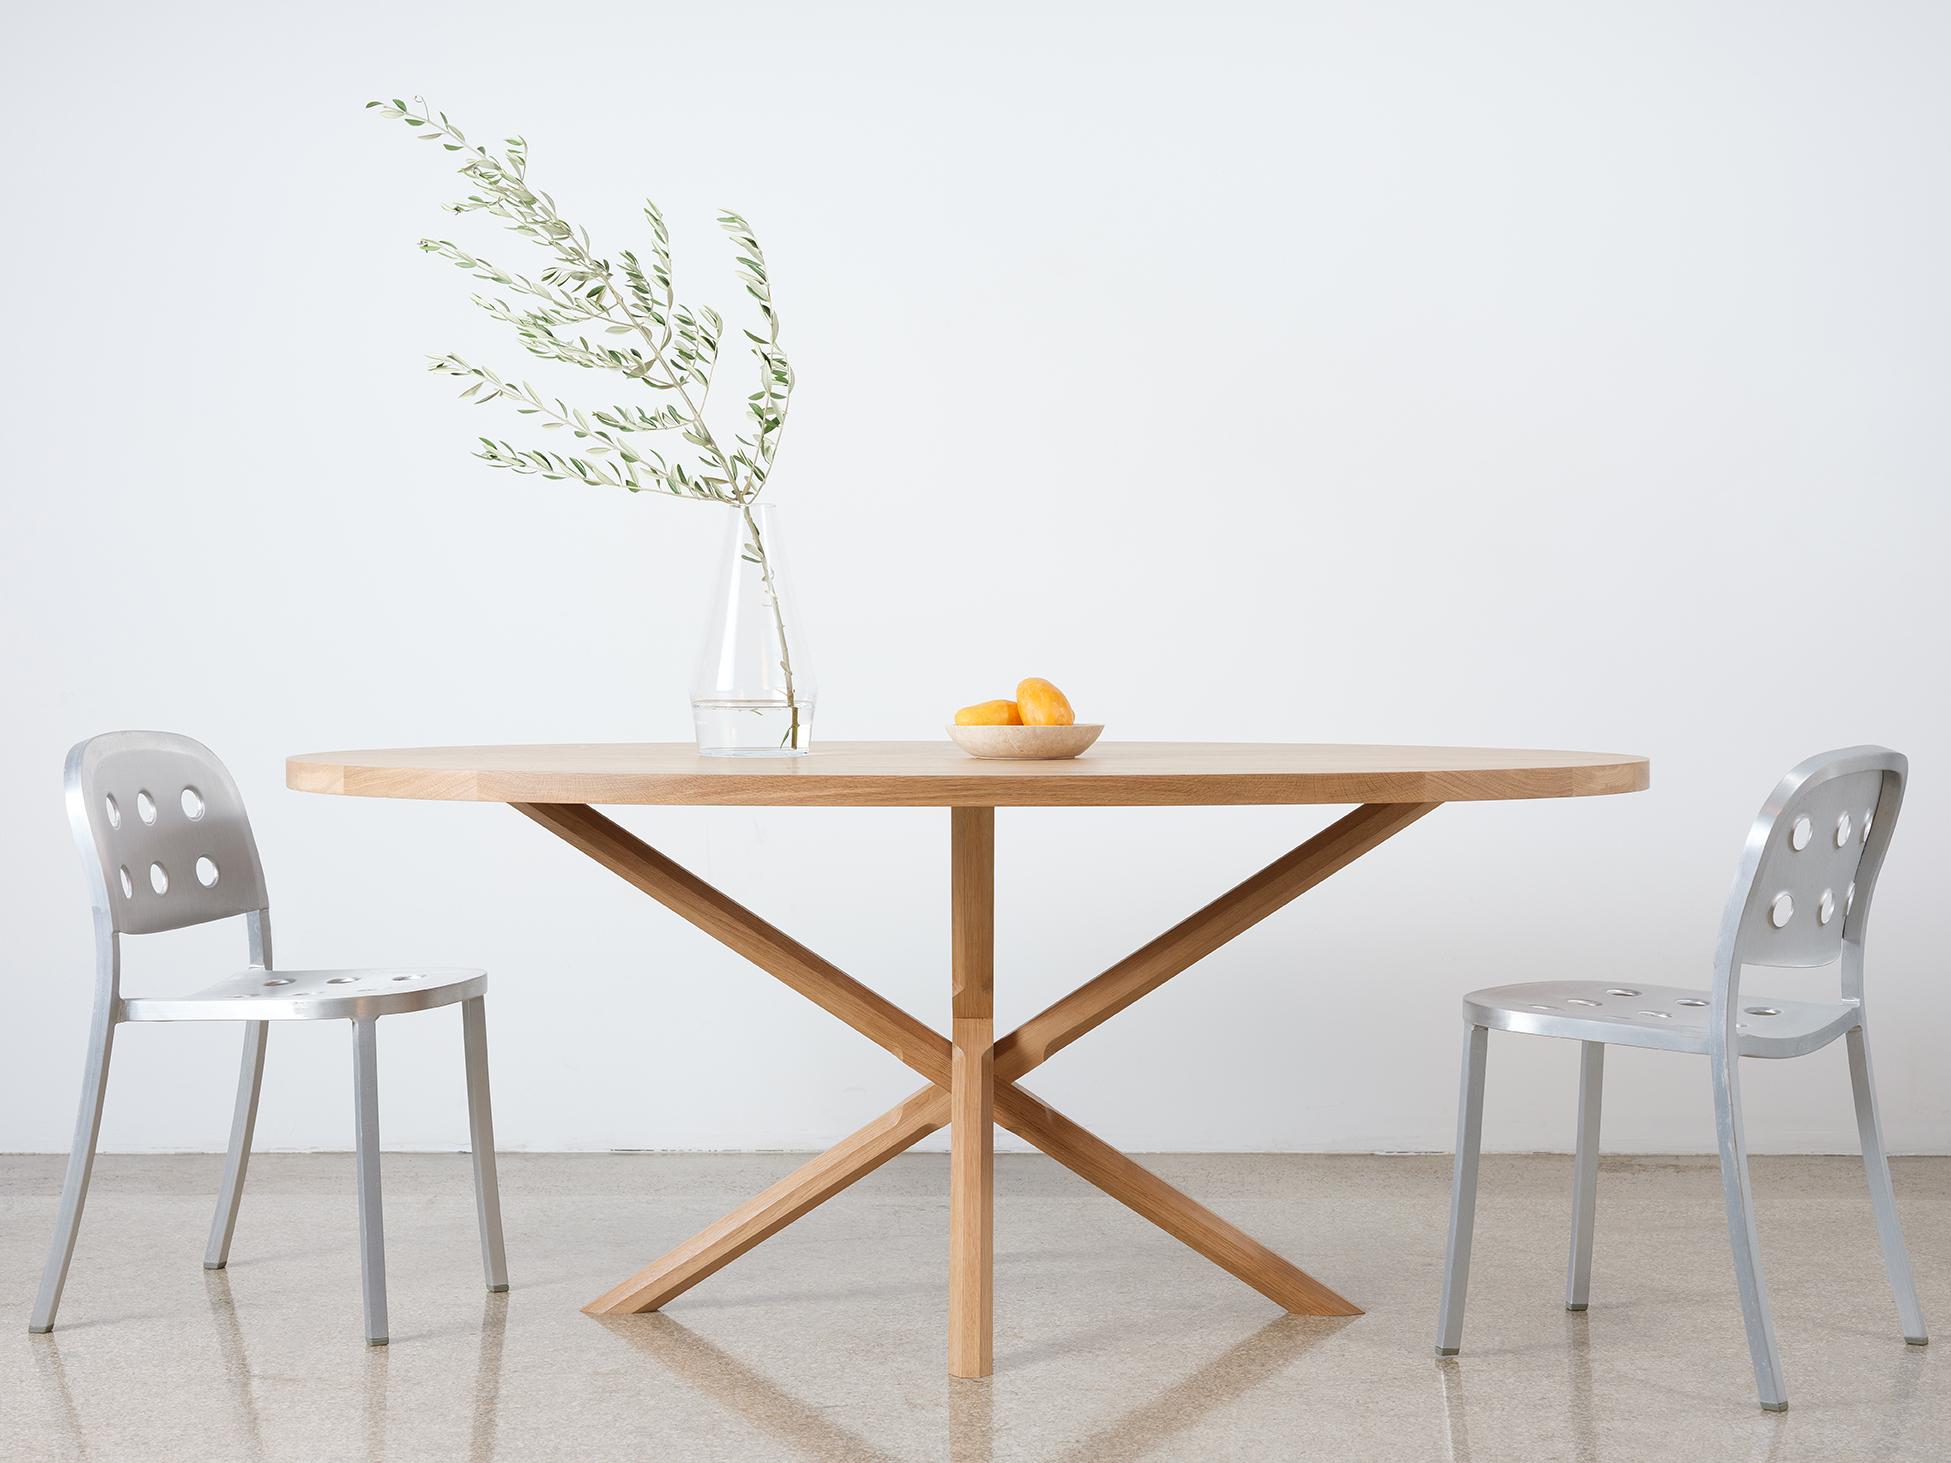 This modern compact oval pedestal table features all-hardwood construction. The chunky table top sits atop an X-shaped base with intricately carved polygonal legs. The legs are two separate components making it easy to disassemble, pack, and